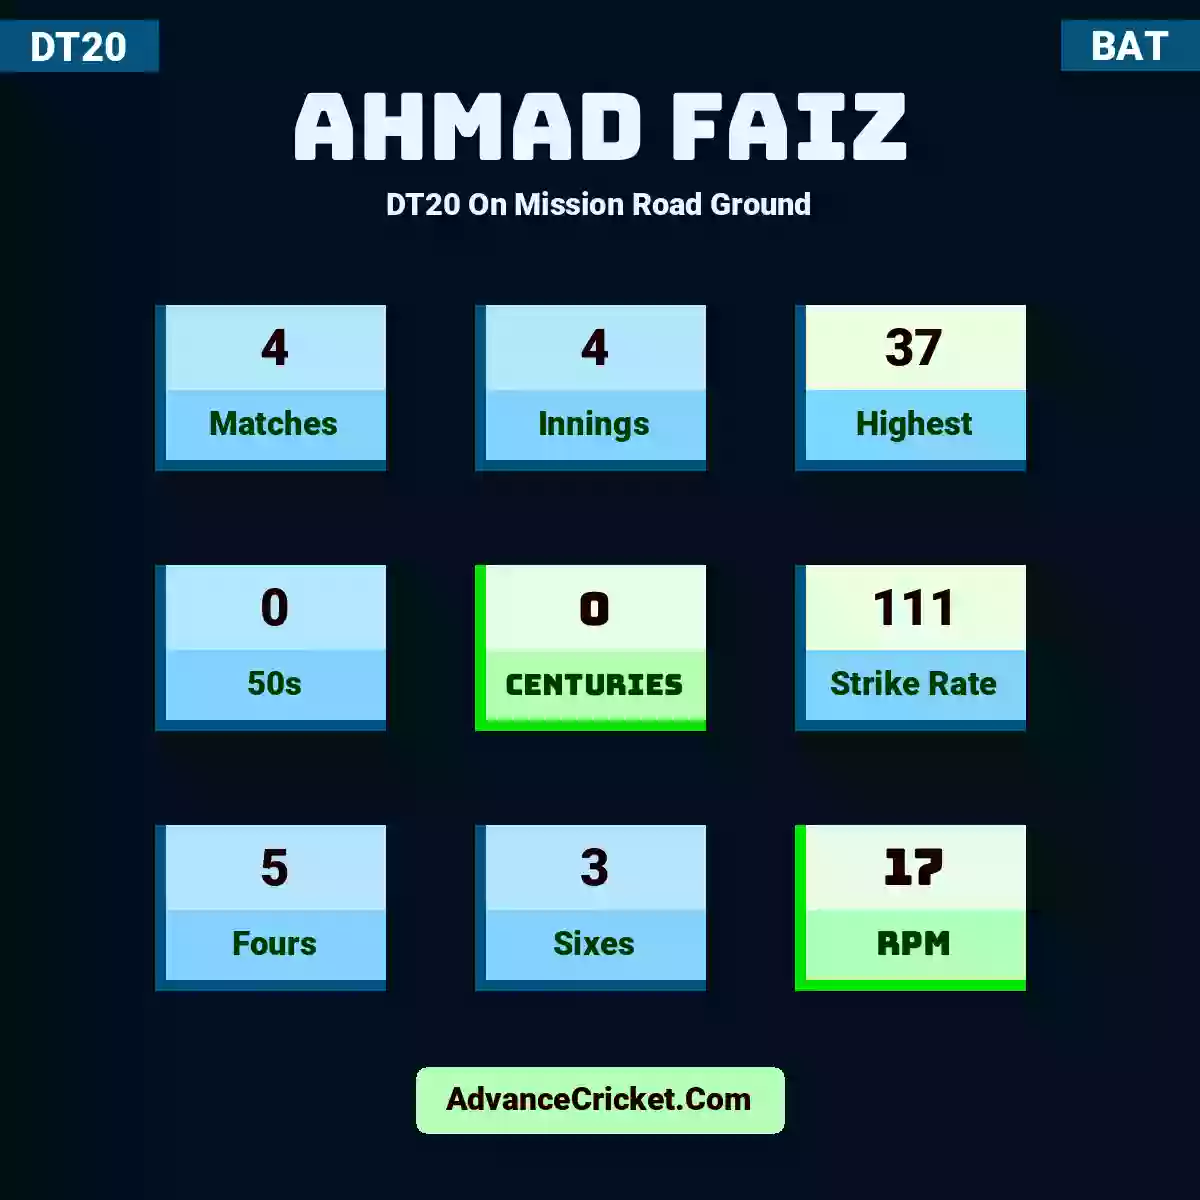 Ahmad Faiz DT20  On Mission Road Ground, Ahmad Faiz played 4 matches, scored 37 runs as highest, 0 half-centuries, and 0 centuries, with a strike rate of 111. A.Faiz hit 5 fours and 3 sixes, with an RPM of 17.